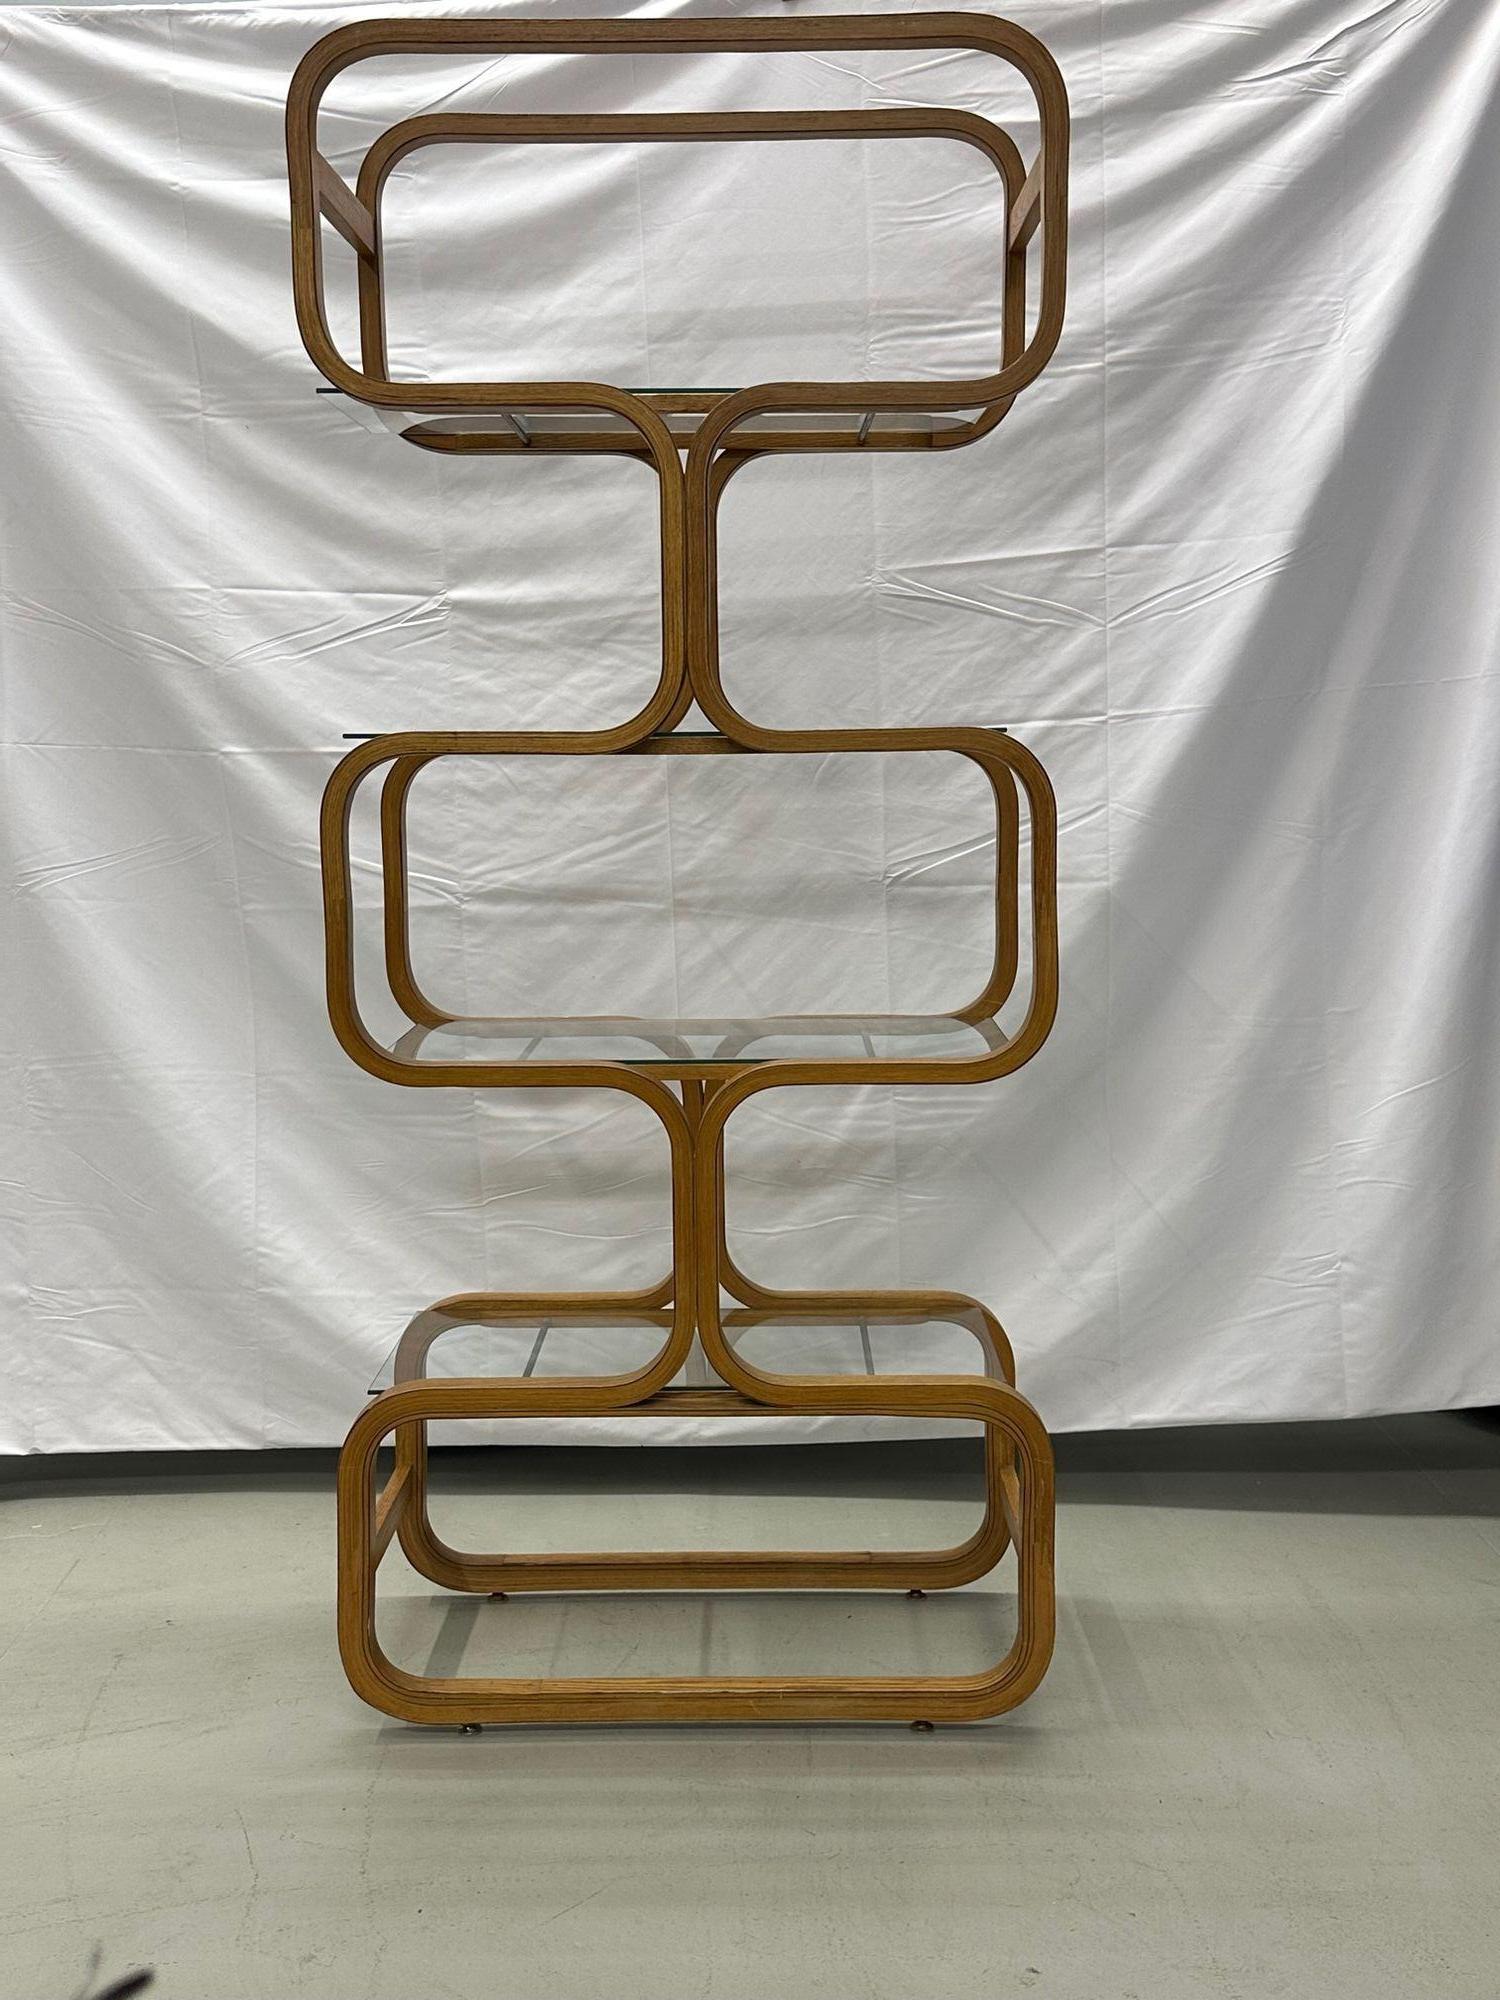 Italian Organic form Mid-Century Modern bentwood bookshelf / etagere by Plycraft
 
Playful shelving unit comprised of bentwood, glass, and brass rods. Manufactured by Plycraft during the midcentury time period. Organic curvy lines. Each glass